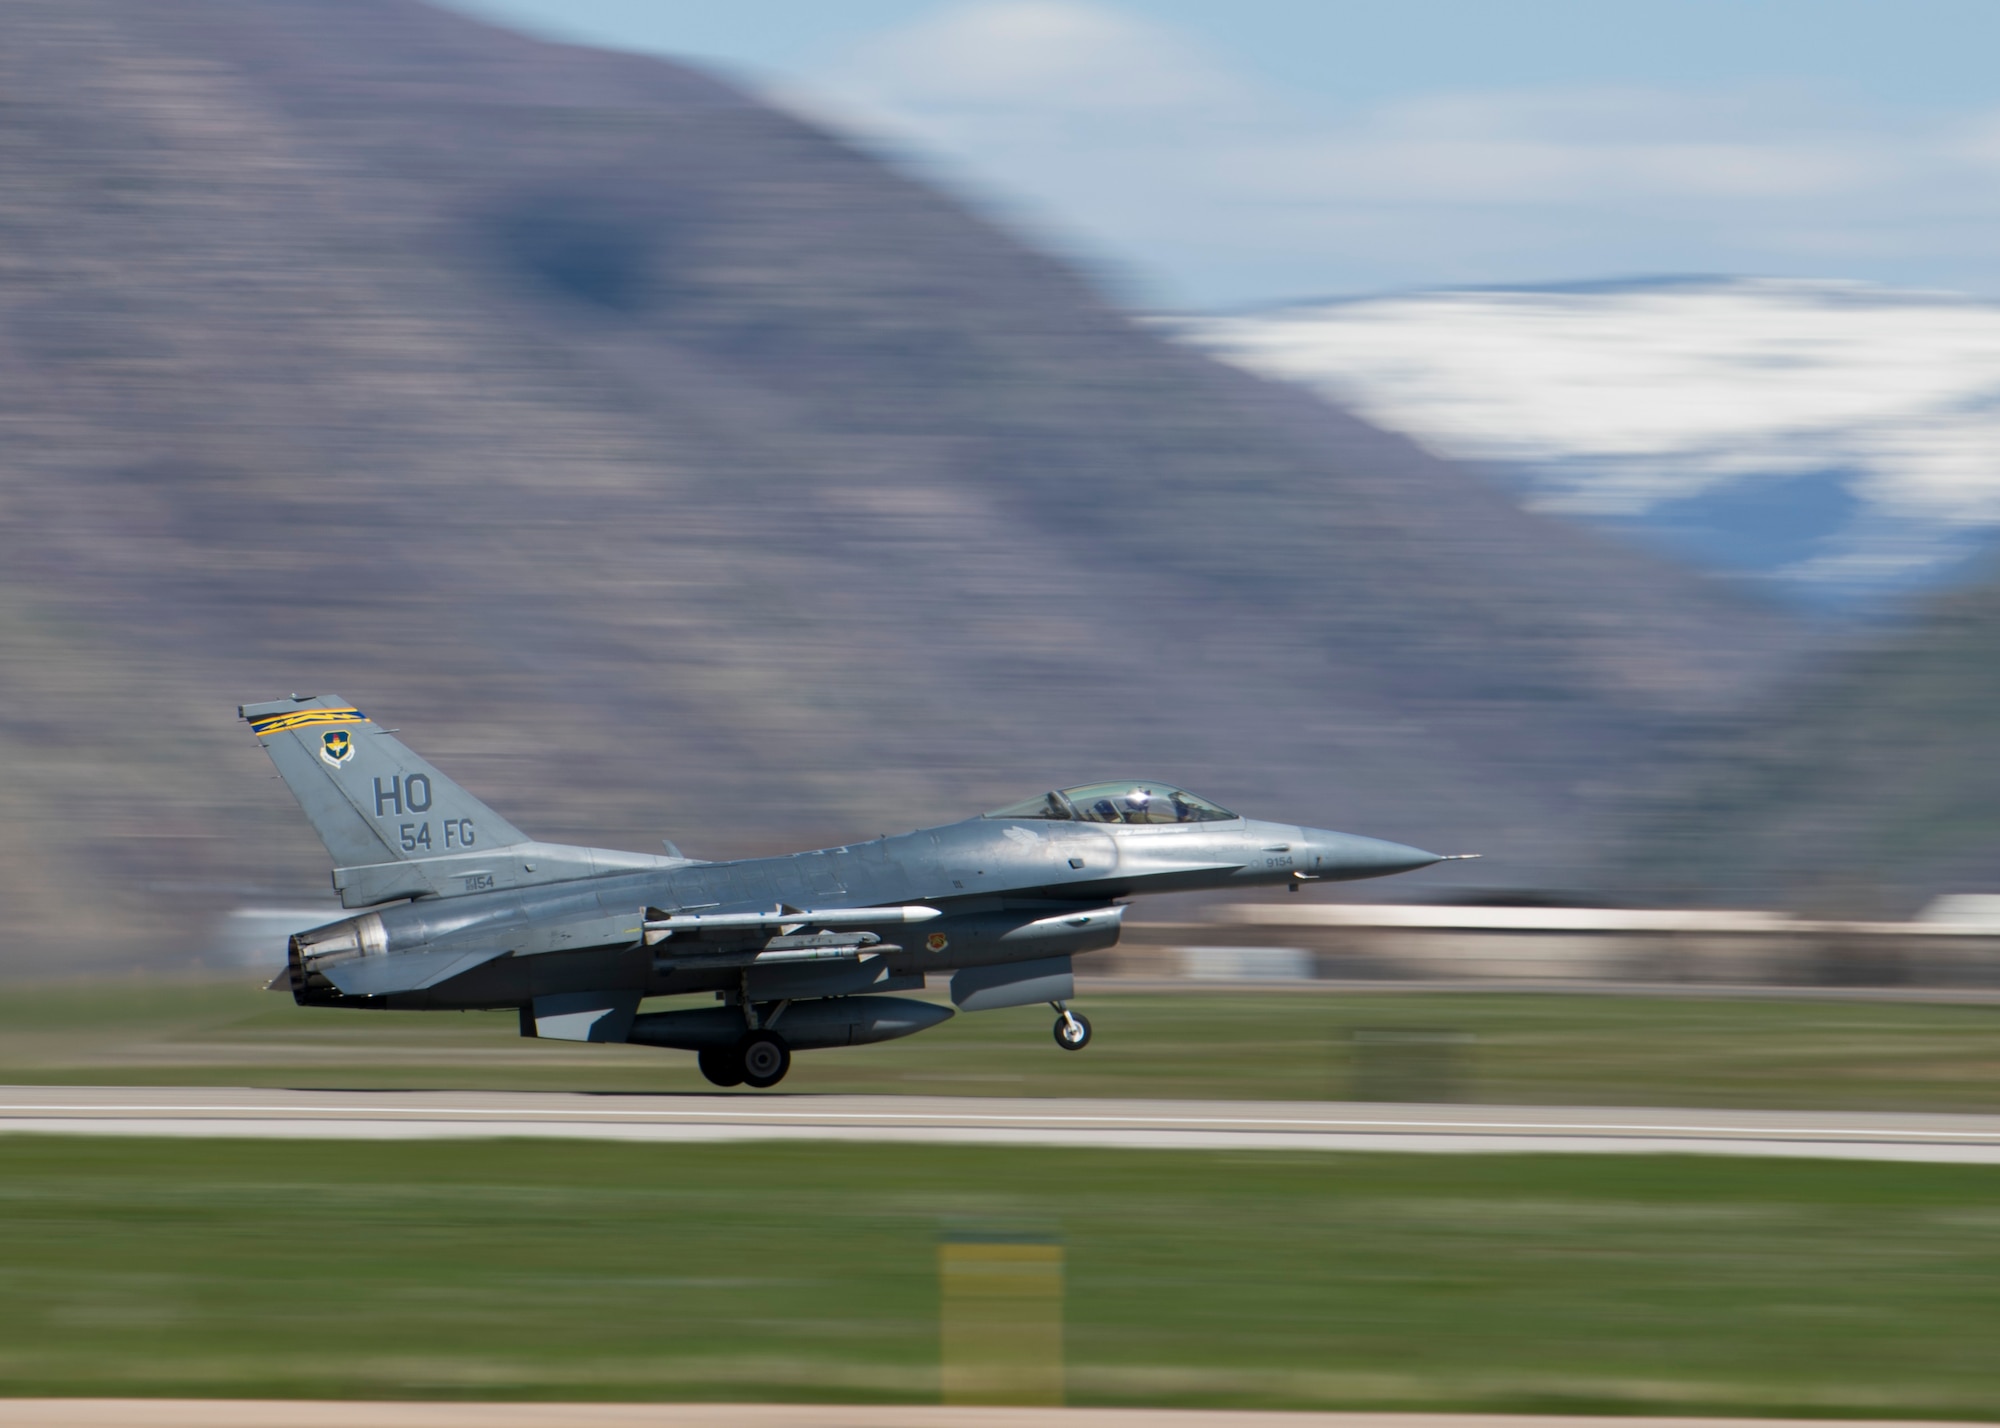 A 311th Fighter Squadron F-16 Viper takes off from Hill Air Force Base, Utah, April 24, 2019. Between April 22 and May 3, the 311th FS conducted 174 sorties in support of student pilot training and dissimilar air combat training with the F-35 Lightning II. (U.S. Air Force photo by Staff Sgt. BreeAnn Sachs)